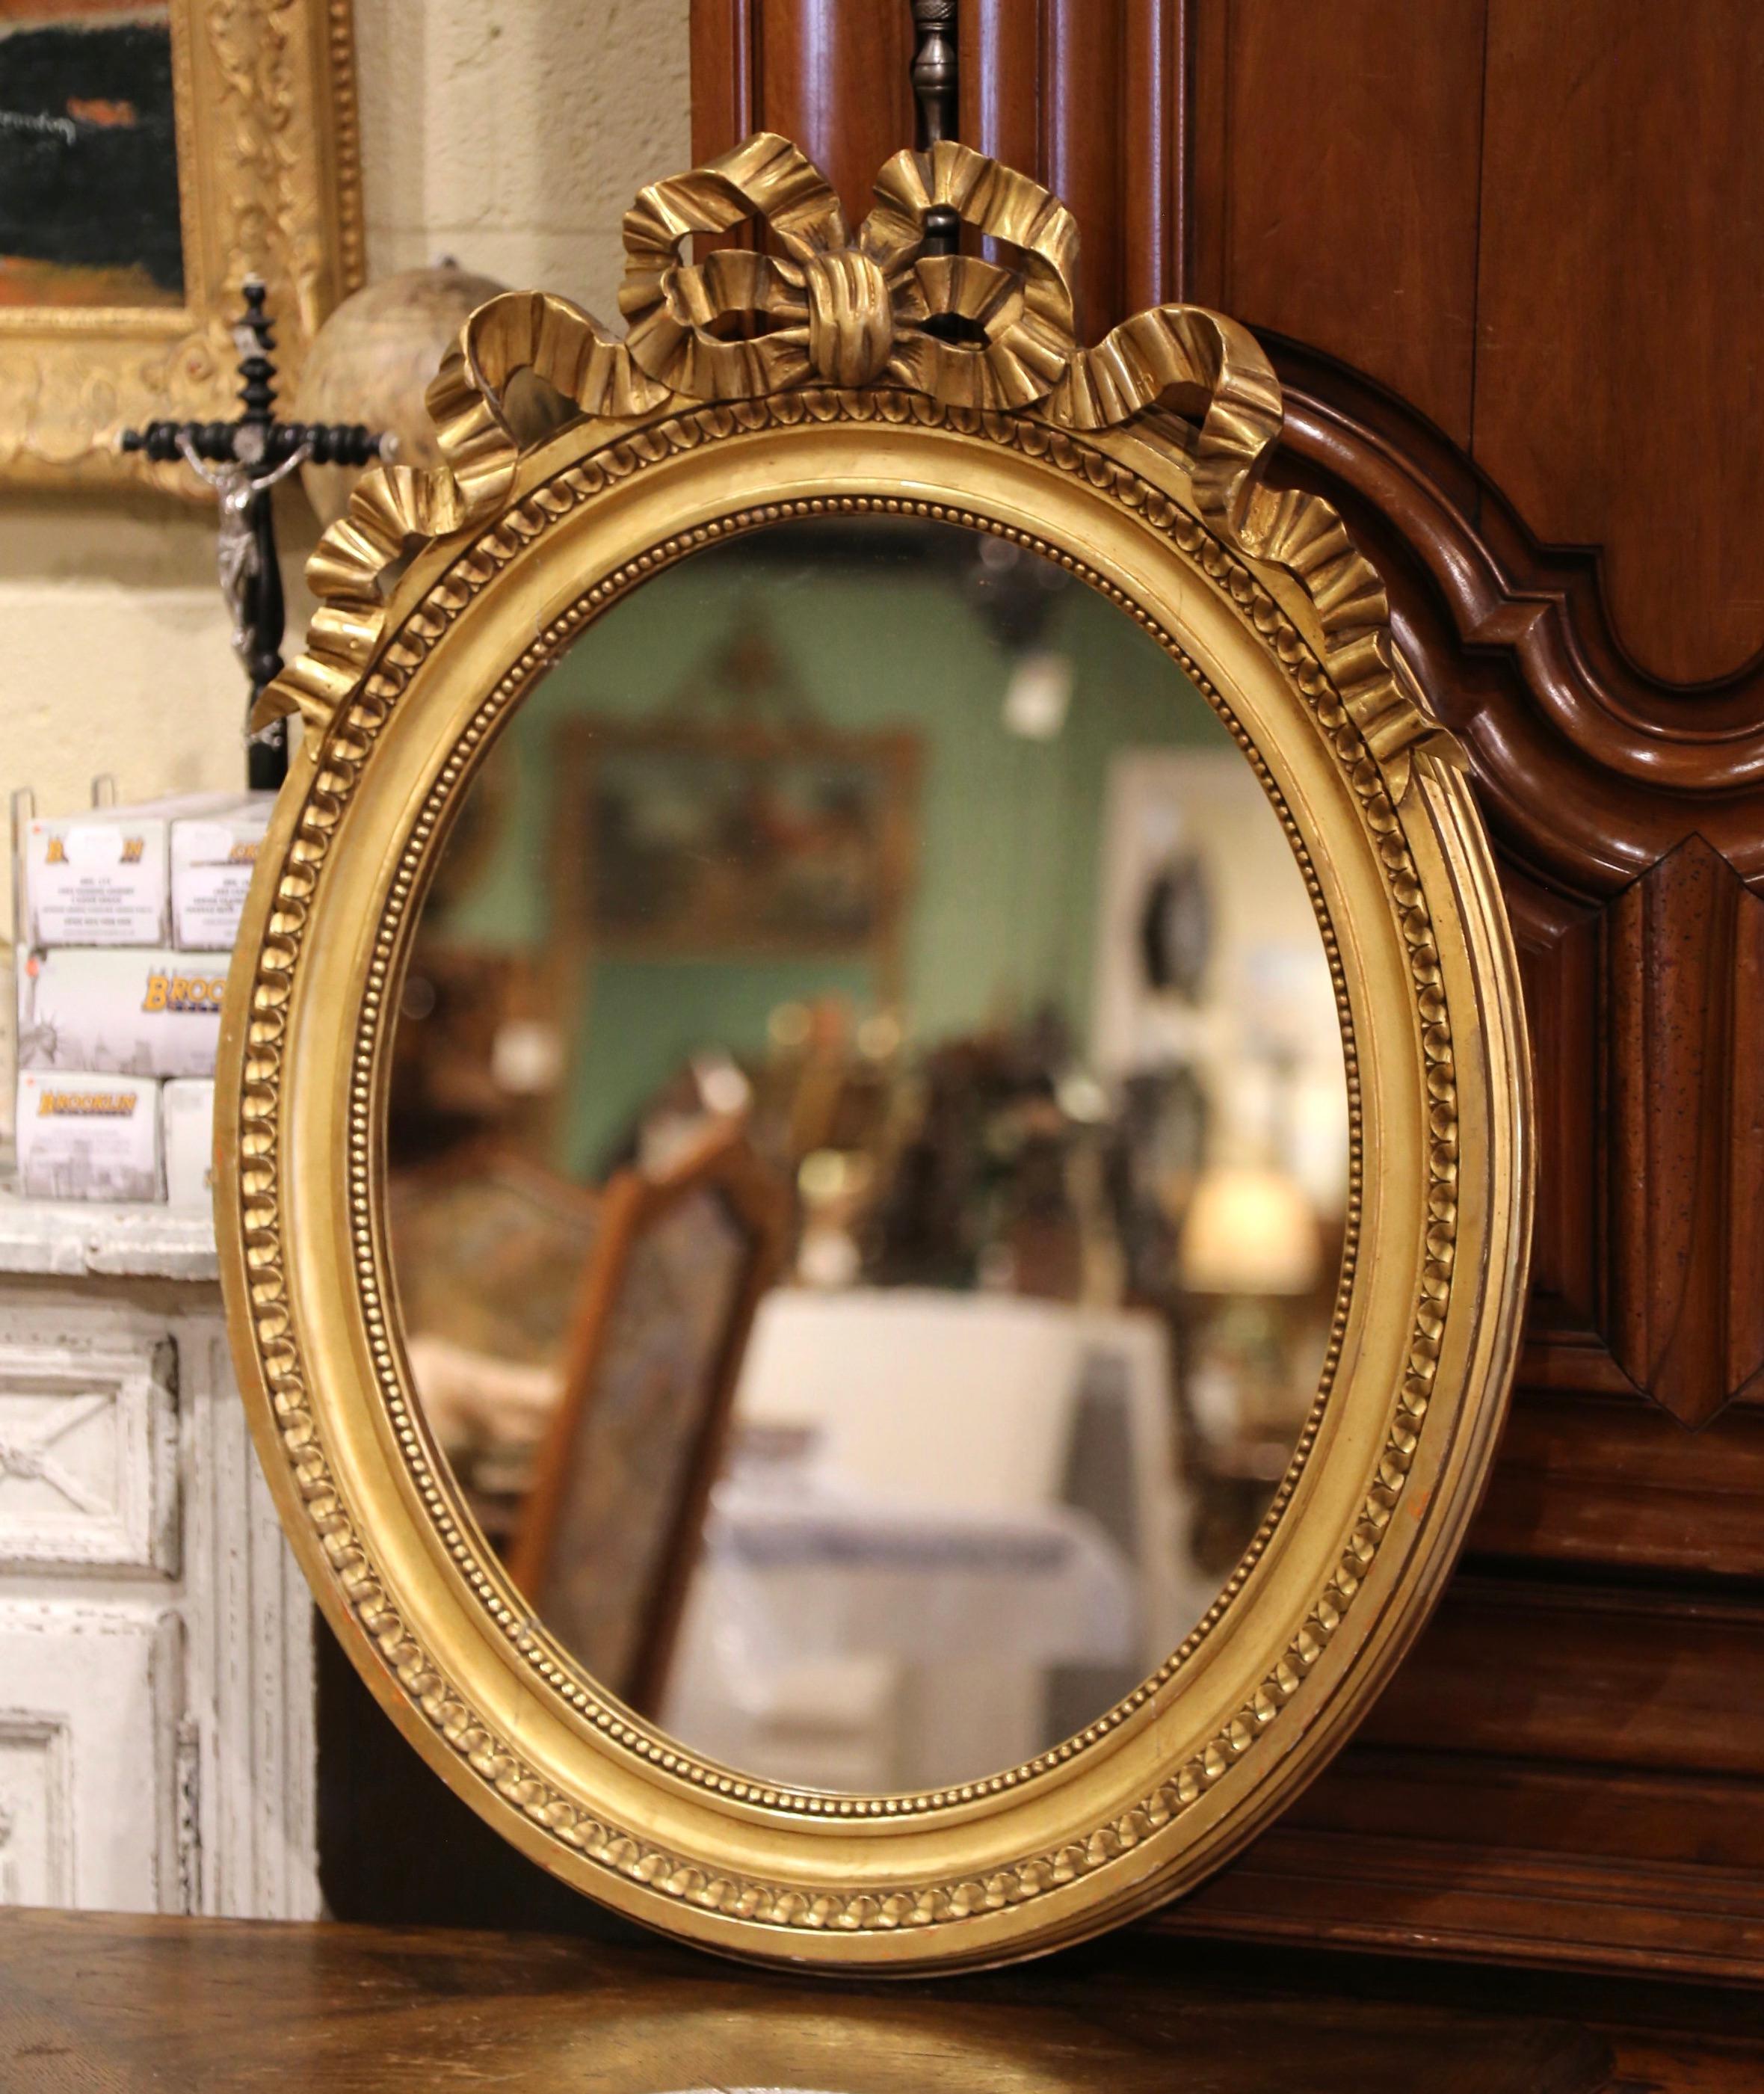 Decorate a powder room or entryway with this elegant antique wall mirror. Crafted in France, circa 1950, the oval frame is decorated with the traditional Louis XVI ribbon bow at the pediment, and embellished with geometric motifs around the frame